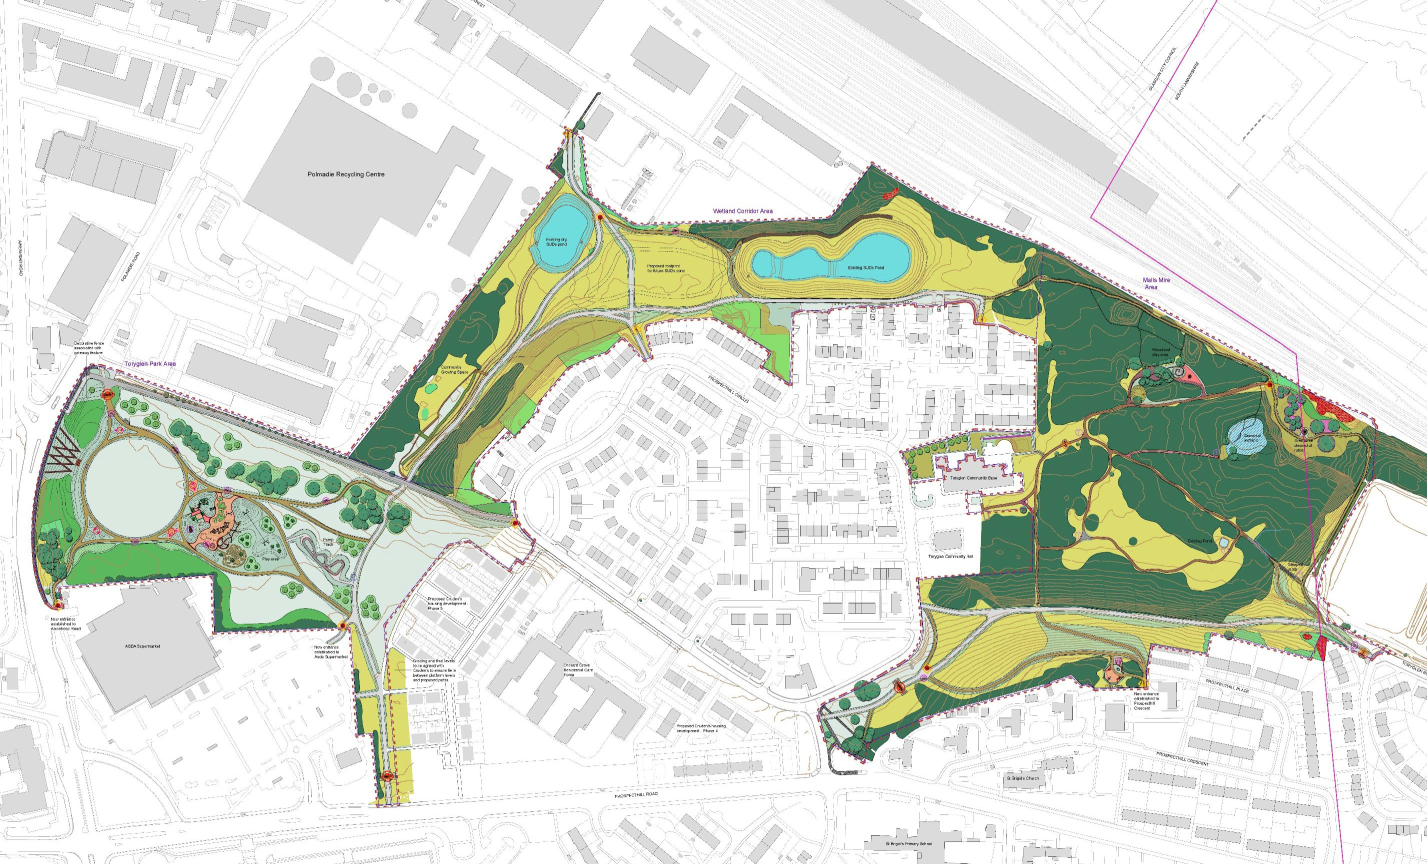 Clyde Gateway to transform Malls Mire into 'woodland retreat'